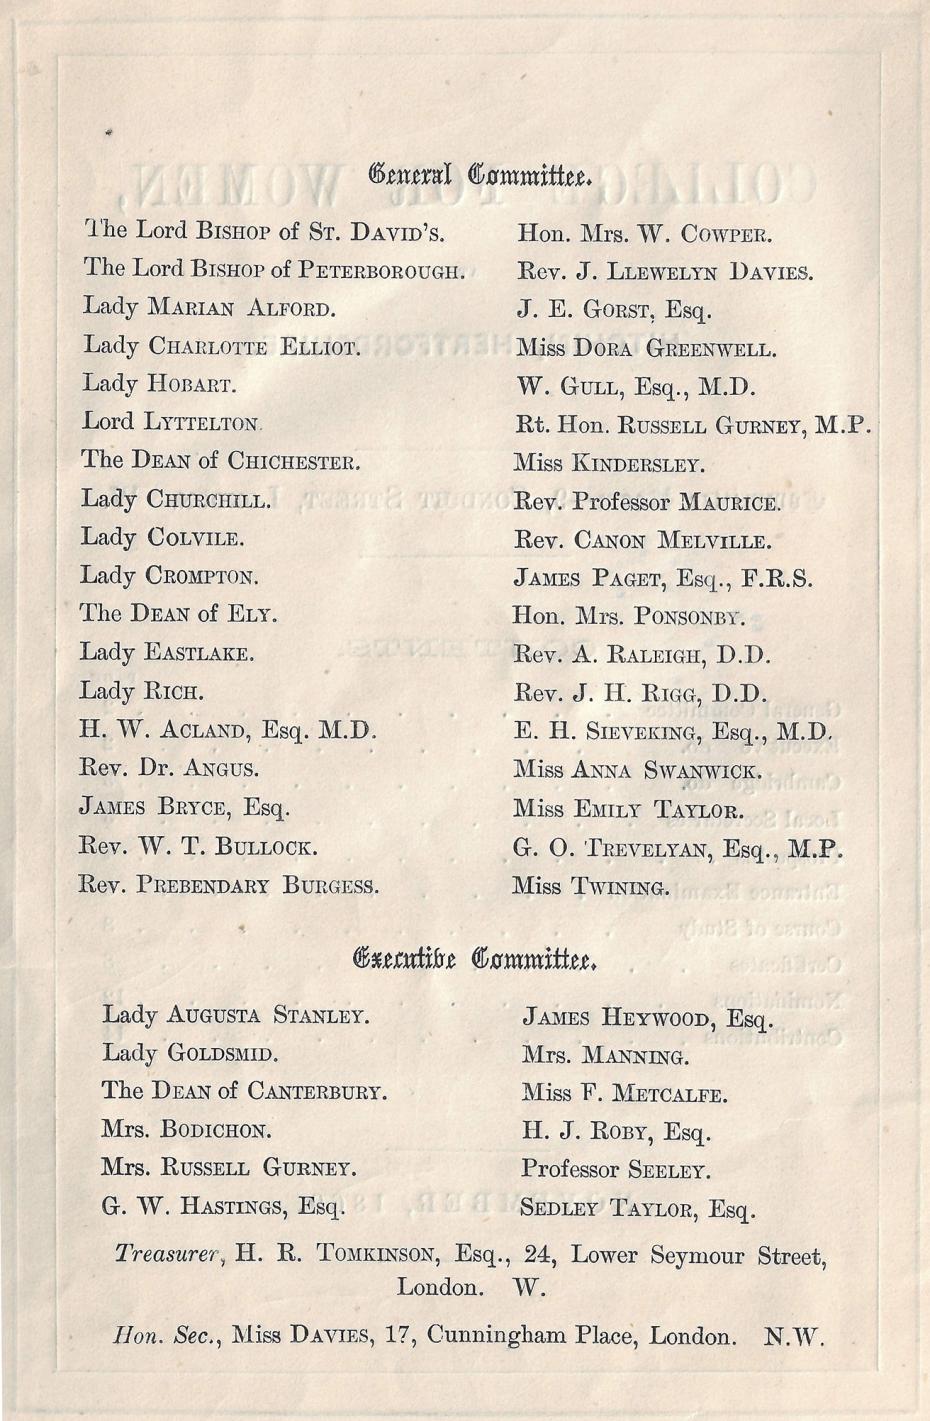 List of members of the General Committee and the Executive Committee, from the College [Annual] Report, November 1869 (archive reference: GCCP 1/1/1pt).